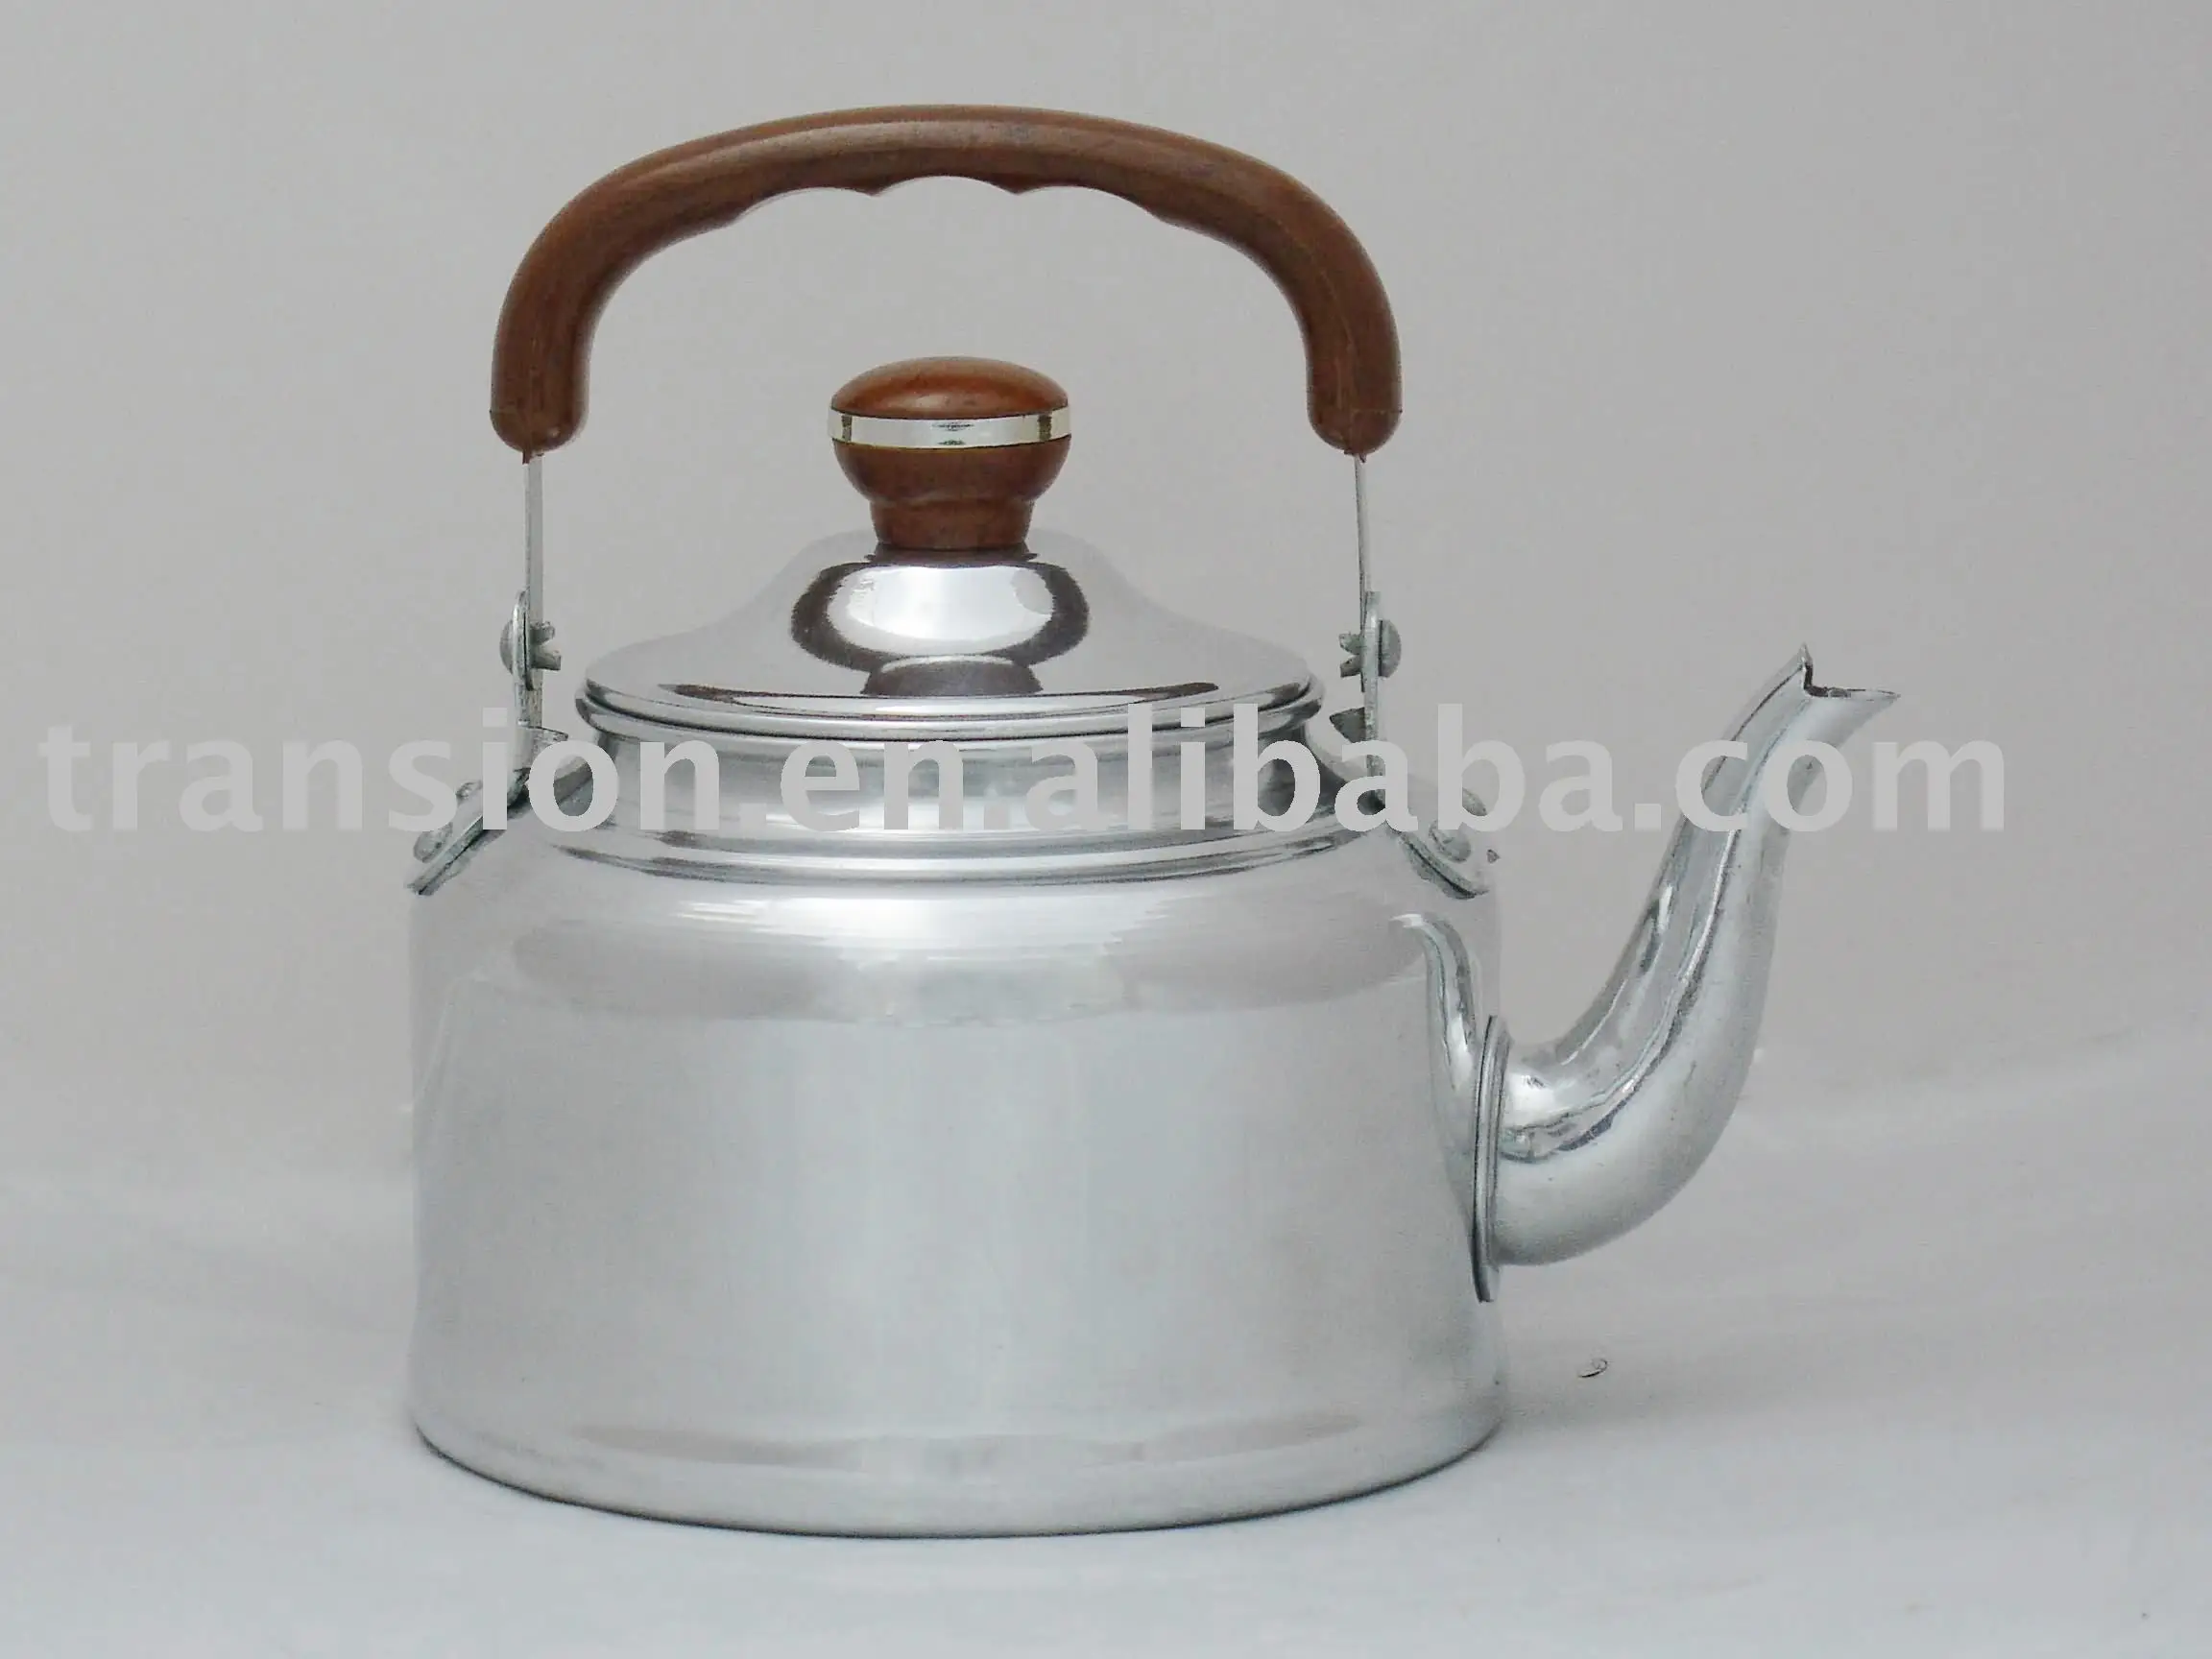 Stove-top Kettles Colorful Handle 